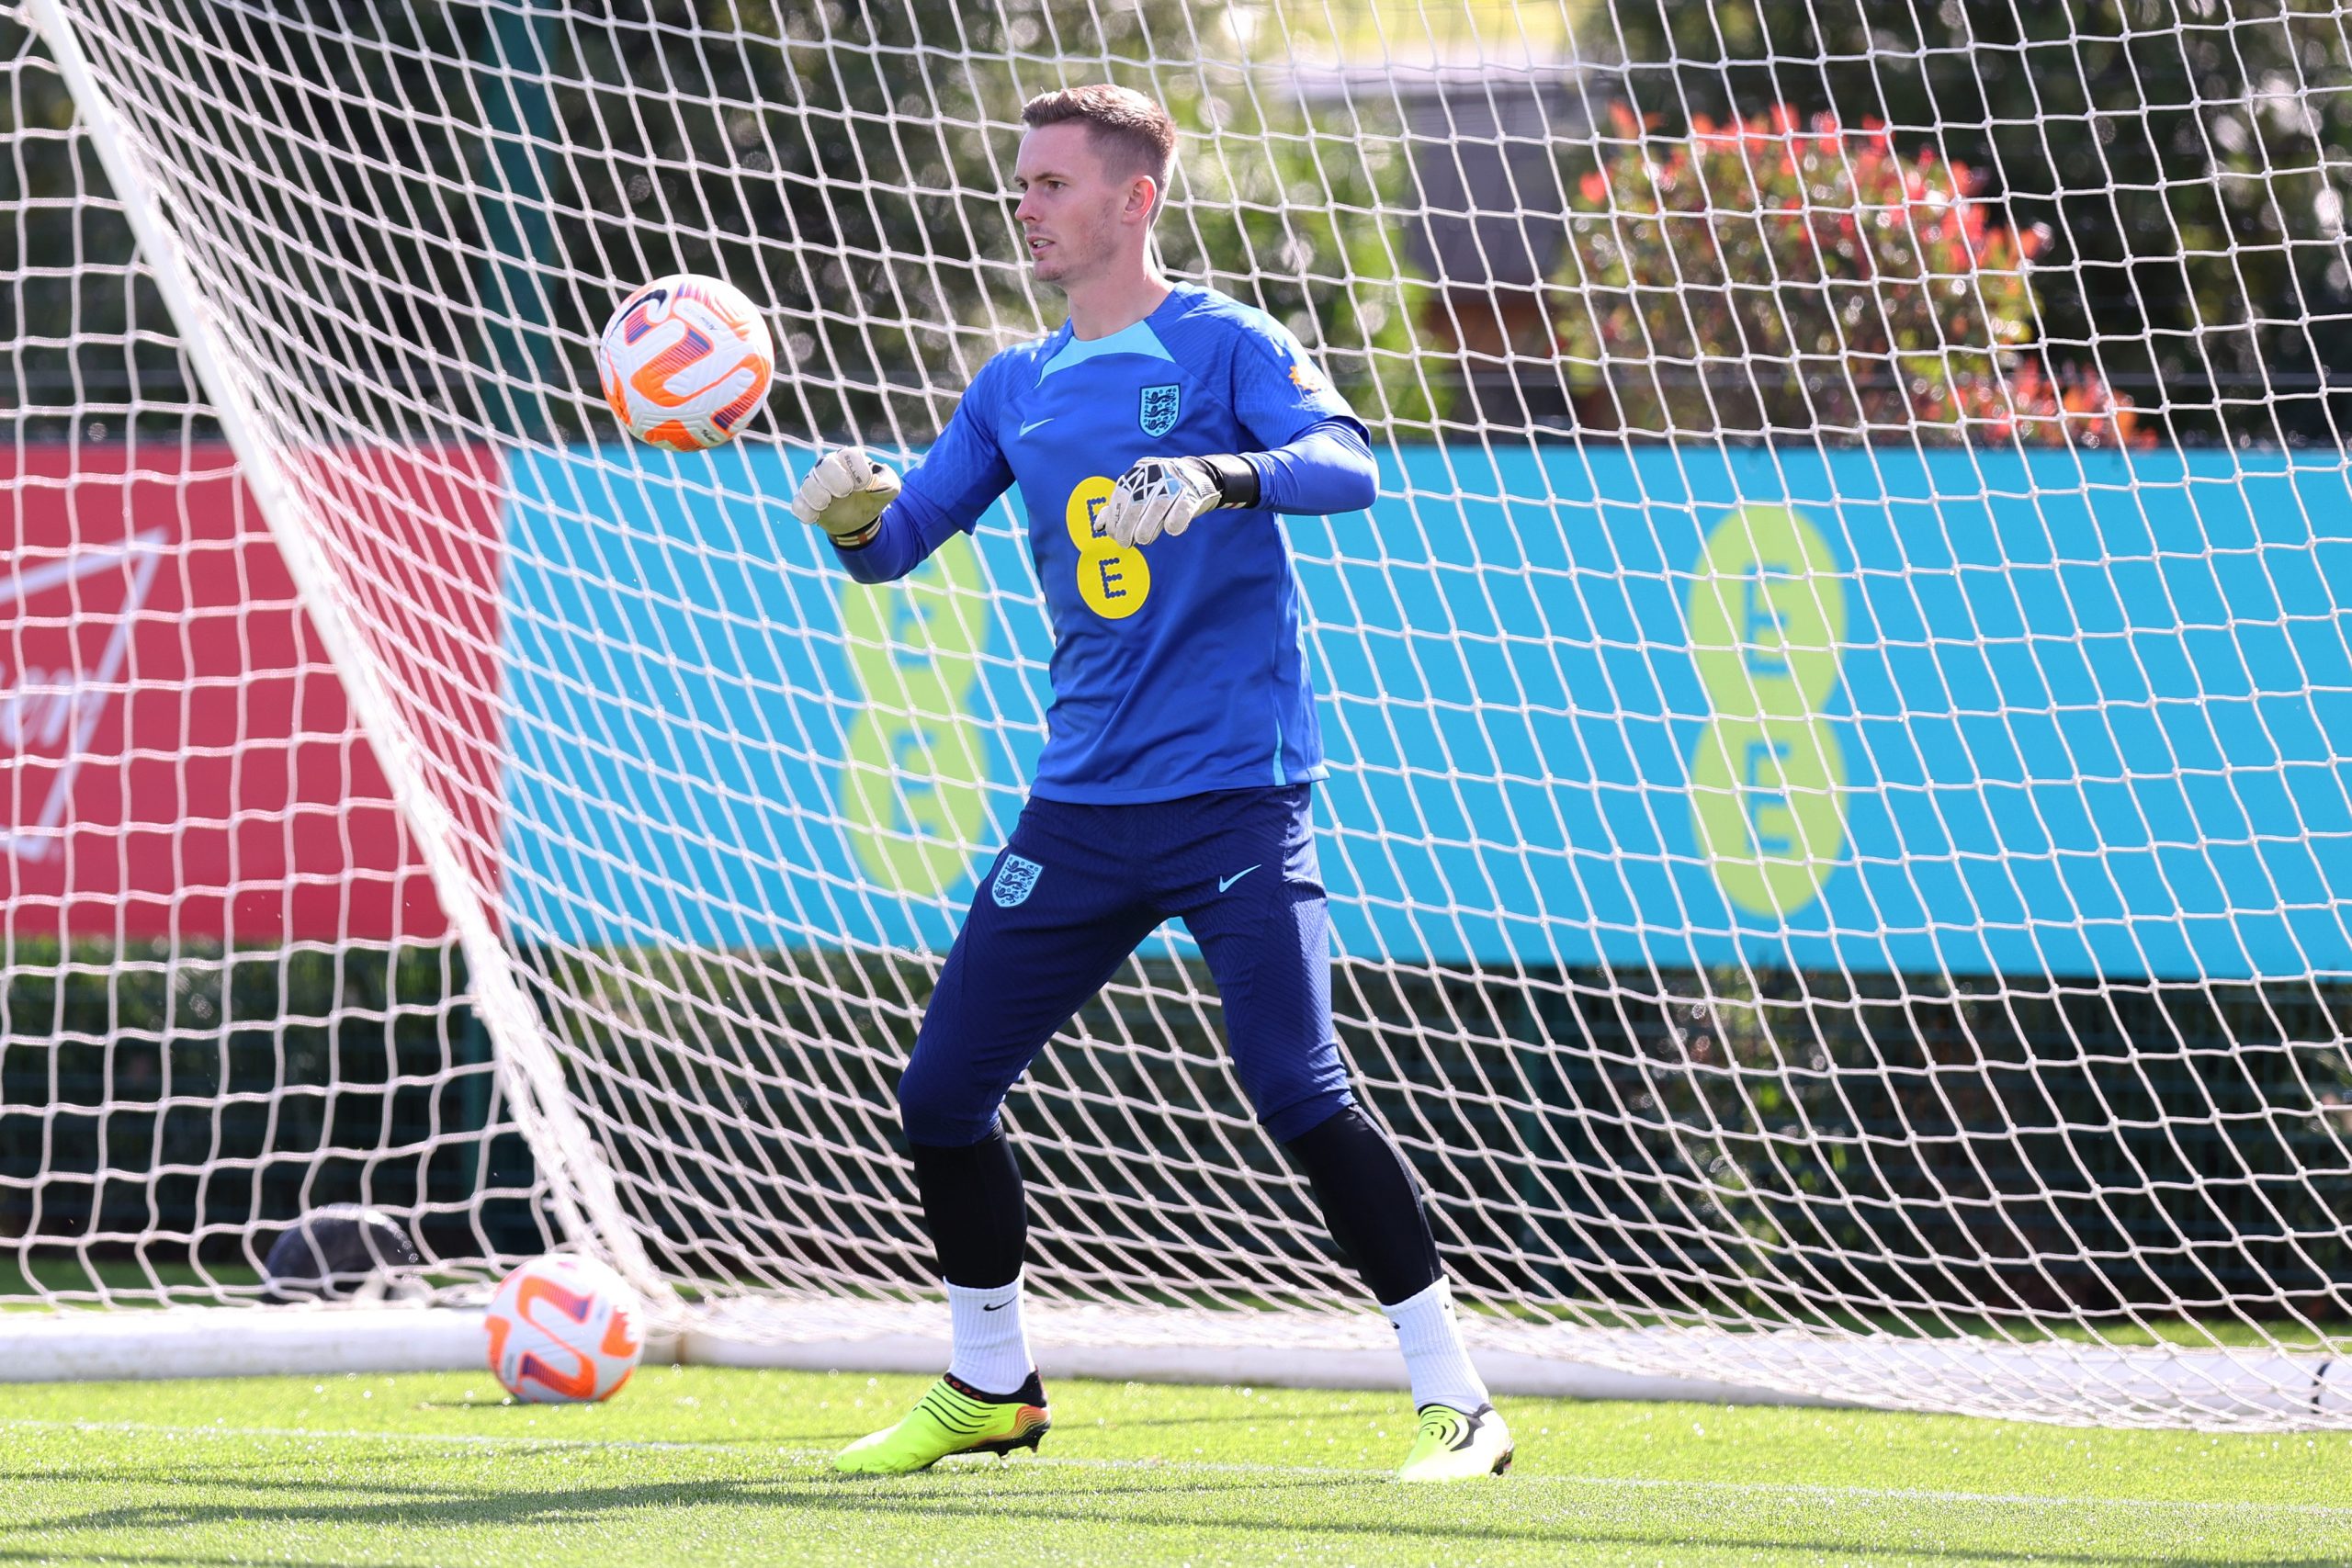 Dean Henderson of England in action during a training session at Tottenham Hotspur Training Centre.